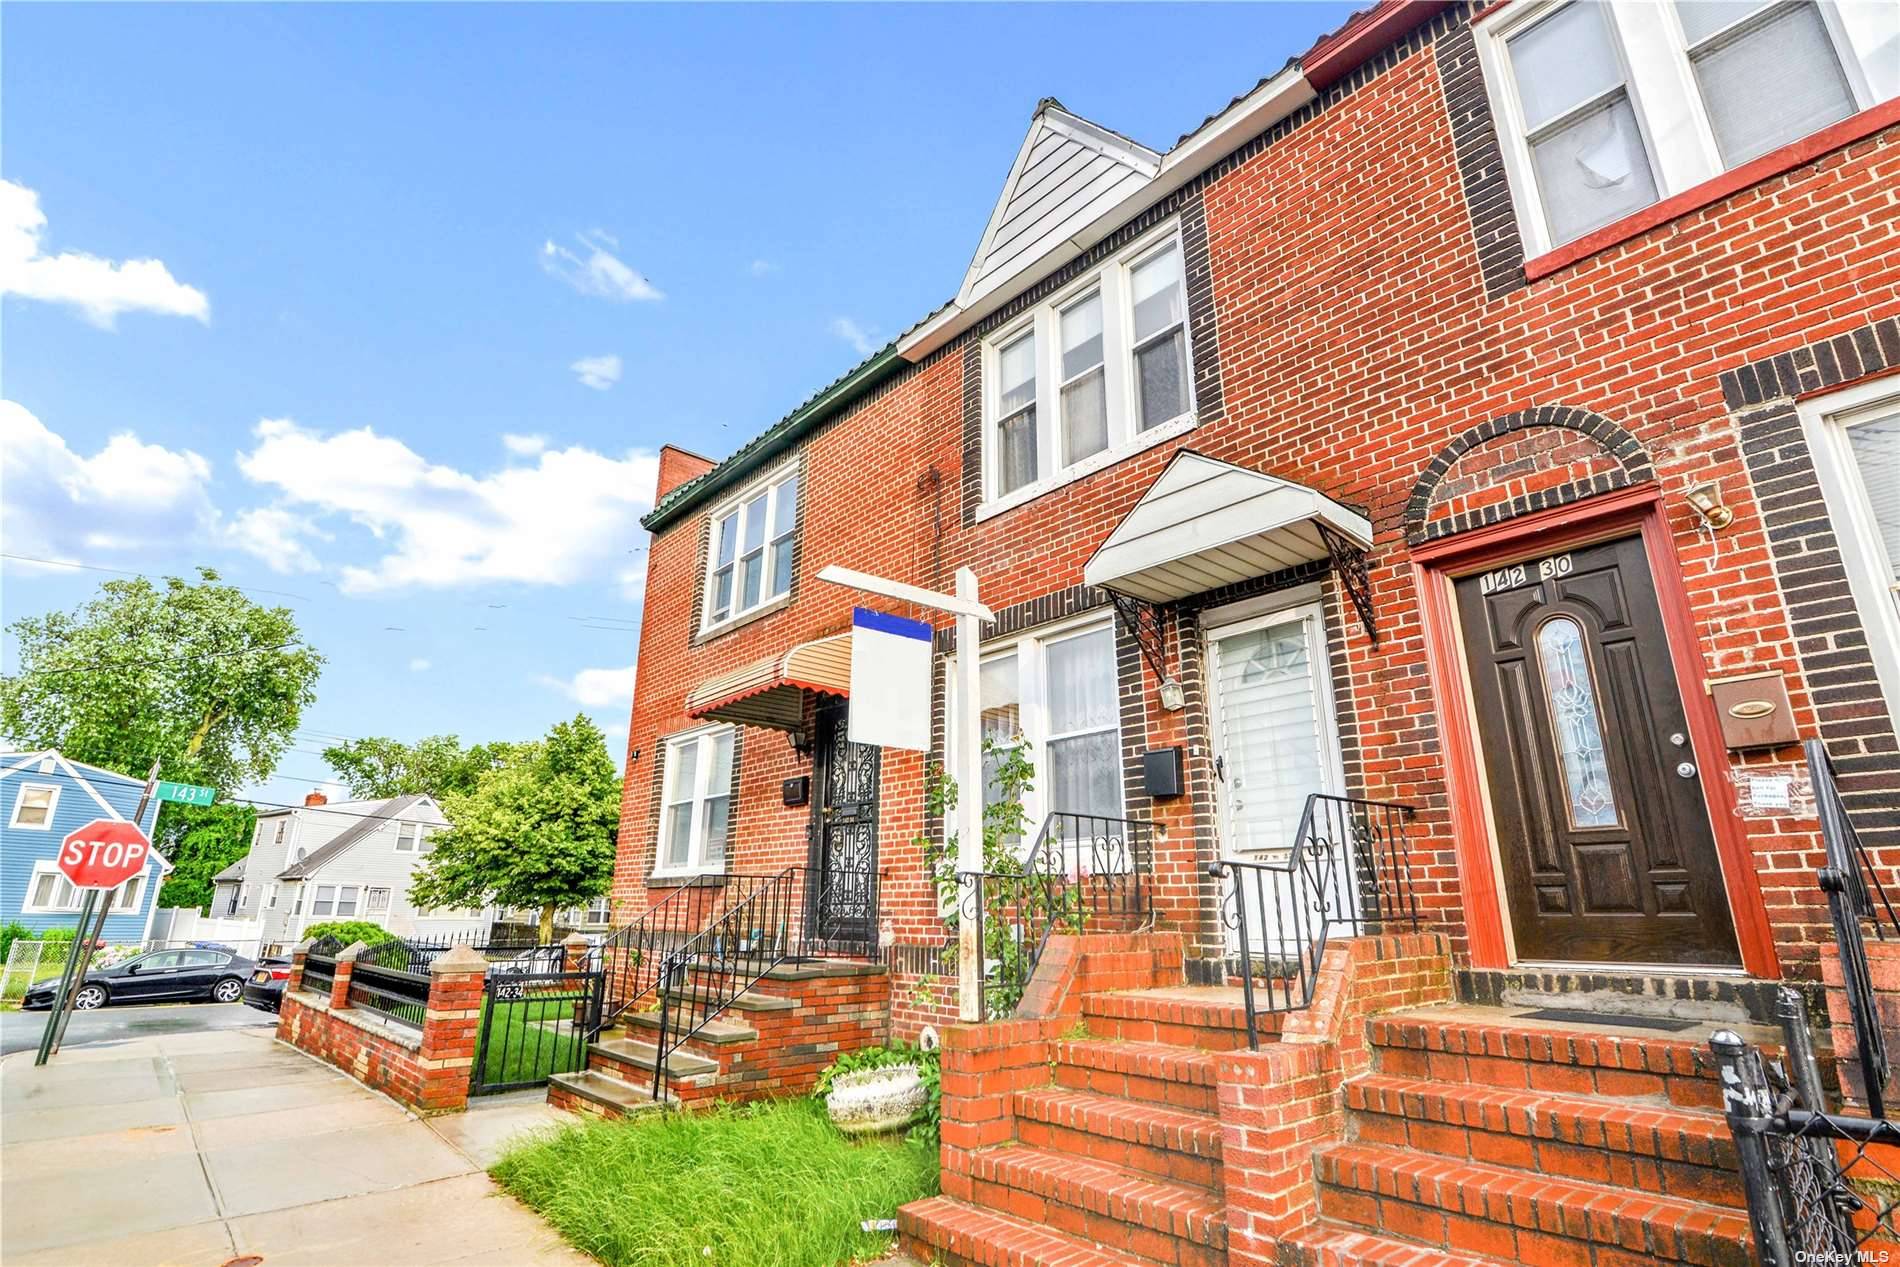 Welcome to 142 32 119th Road, a charming 1 family townhouse in the heart of Jamaica, Queens.